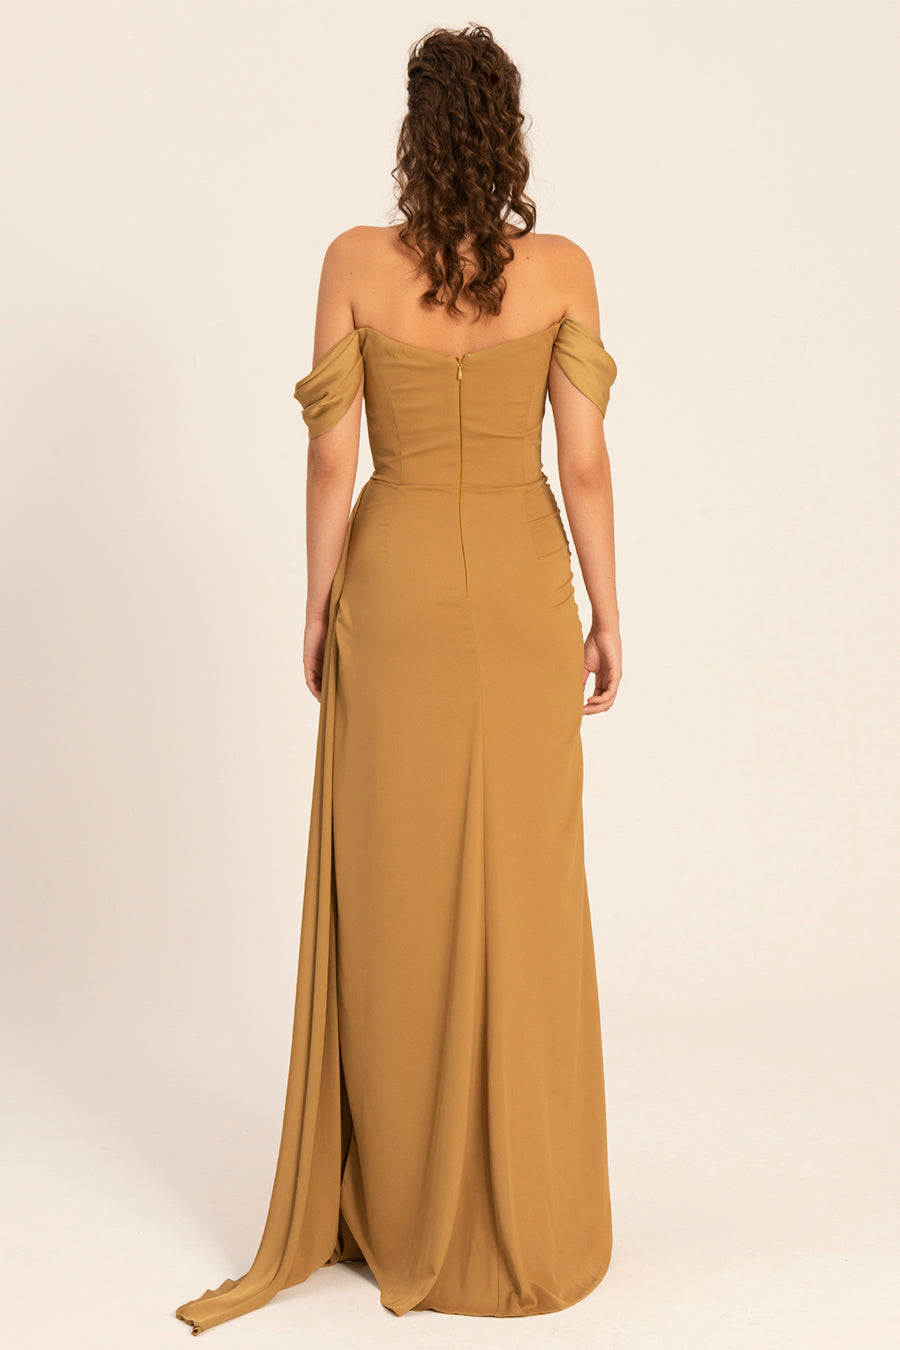 Grace - Mystic Evenings | Evening and Prom Dresses